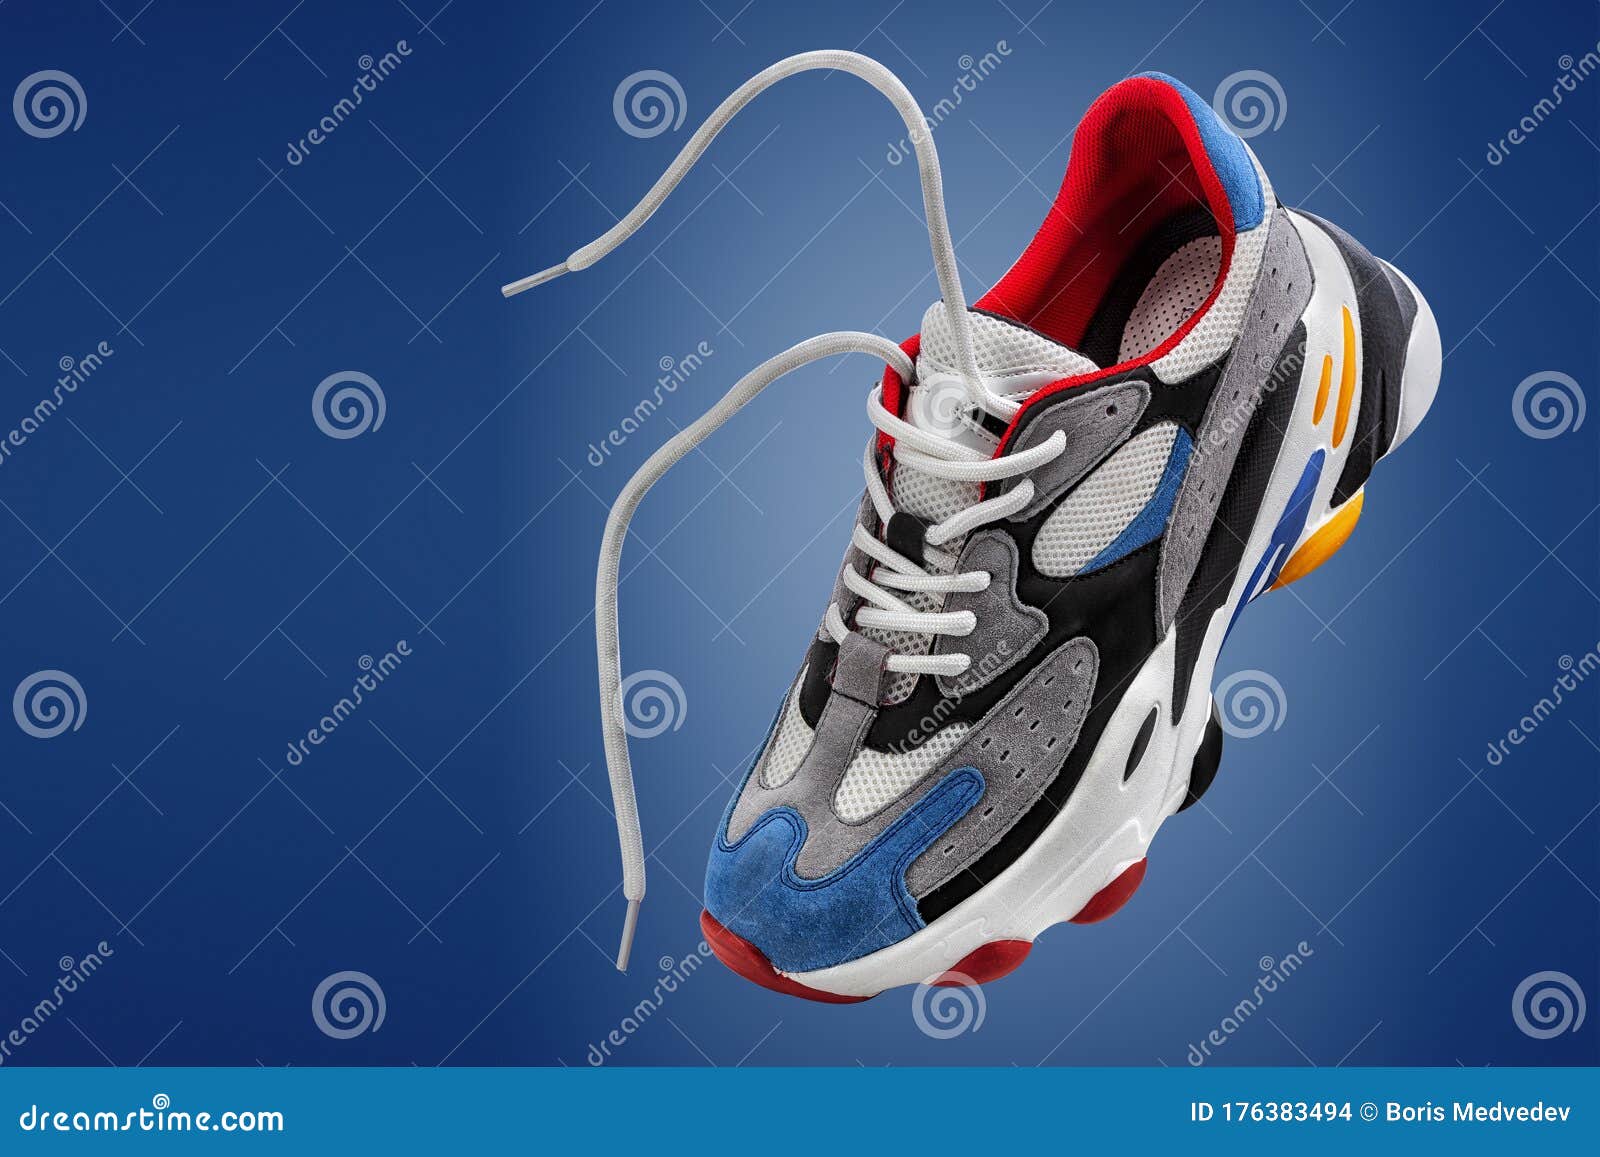 Sports Shoes, Sports Sneakers on a Blue Background with Space for the ...